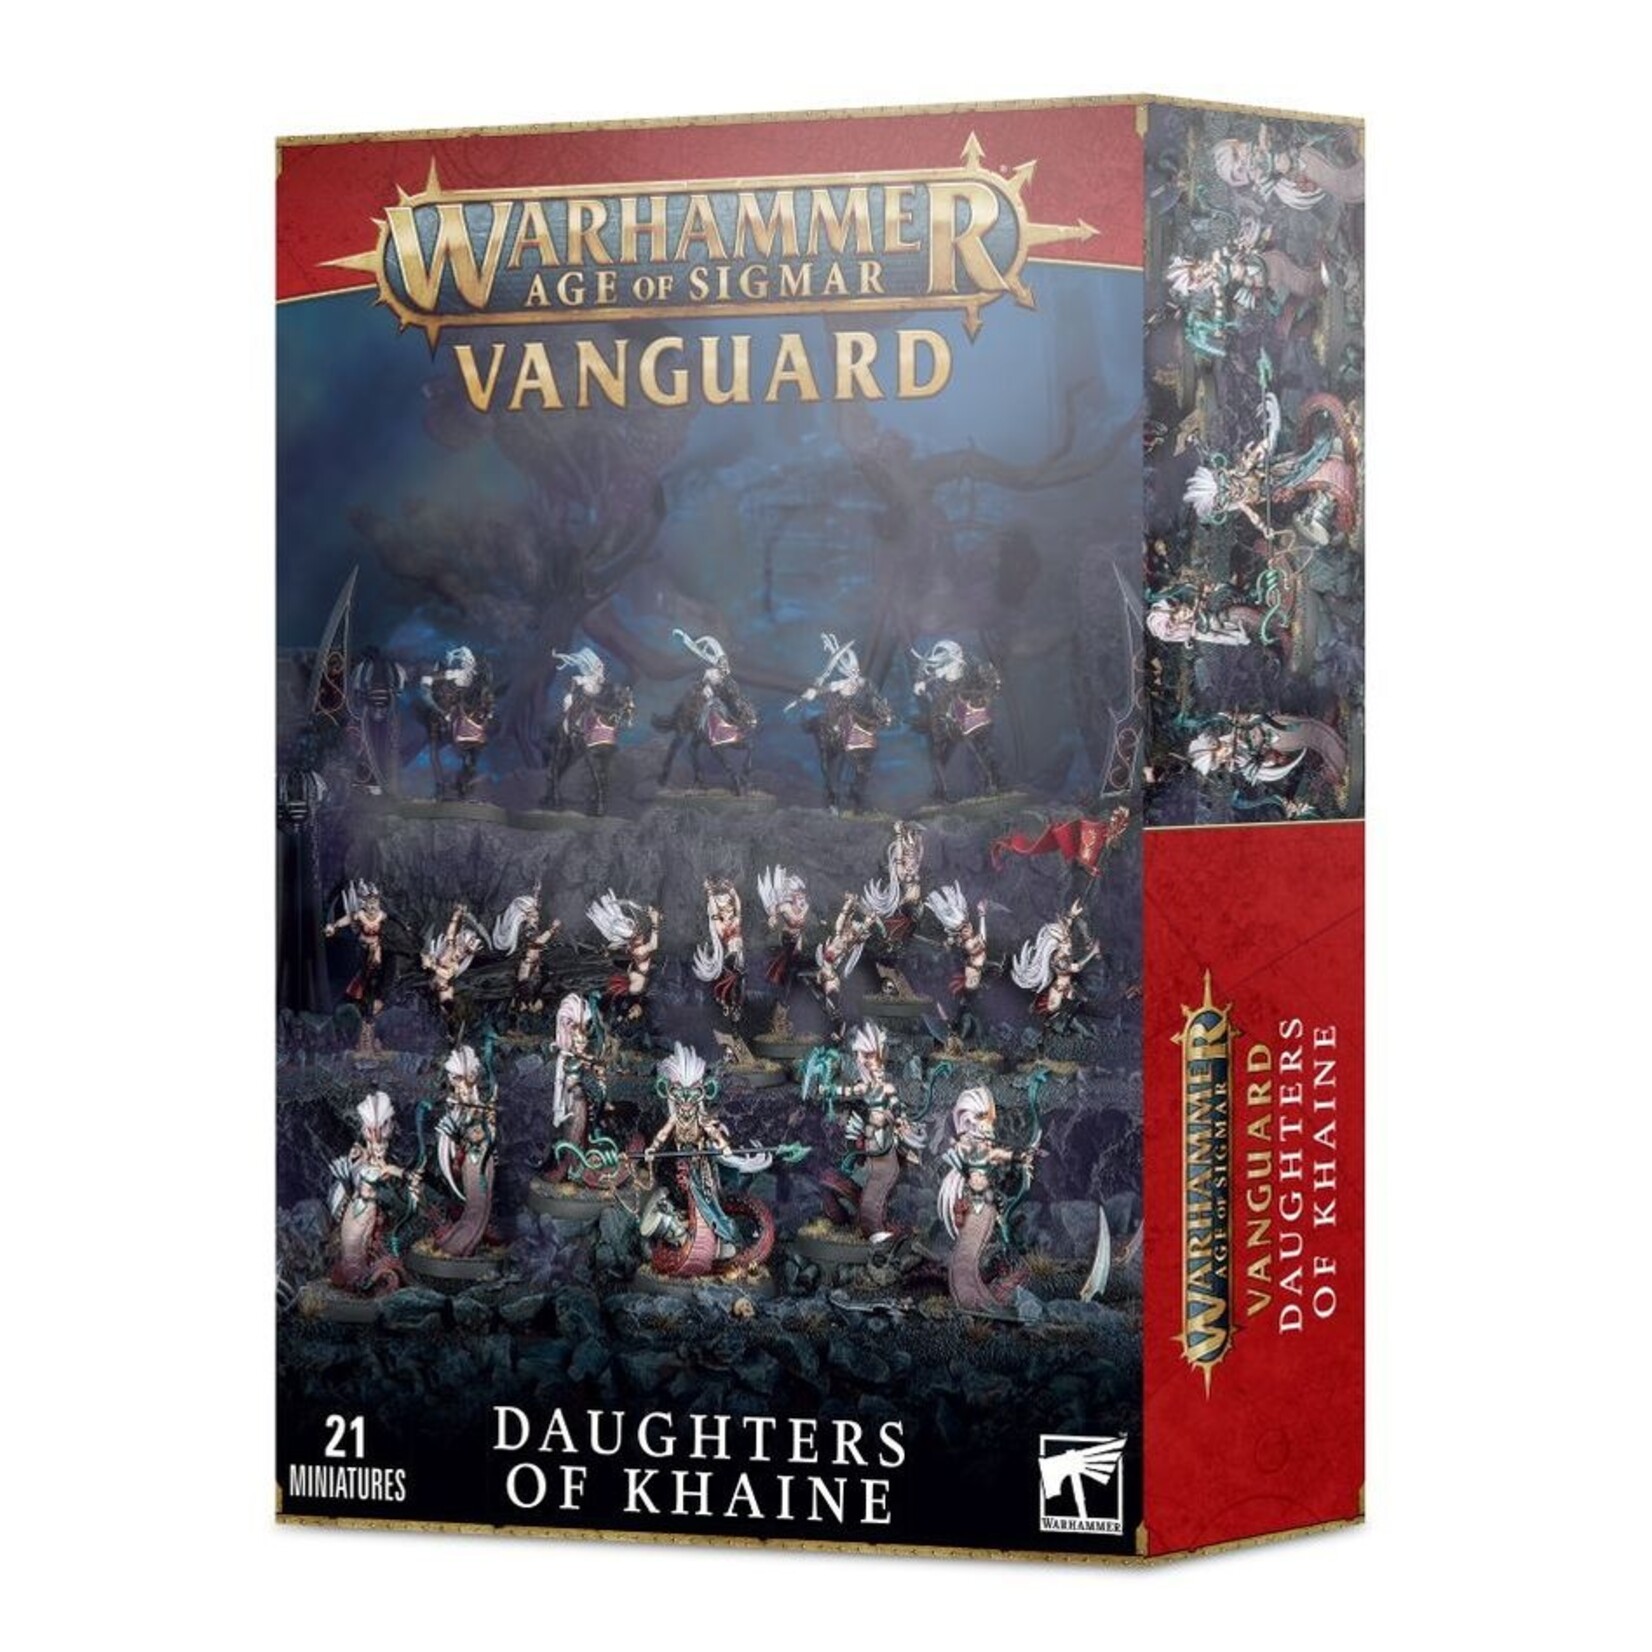 Warhammer: age of sigmar Daughters of Khaine: Krethusa's Cronehost